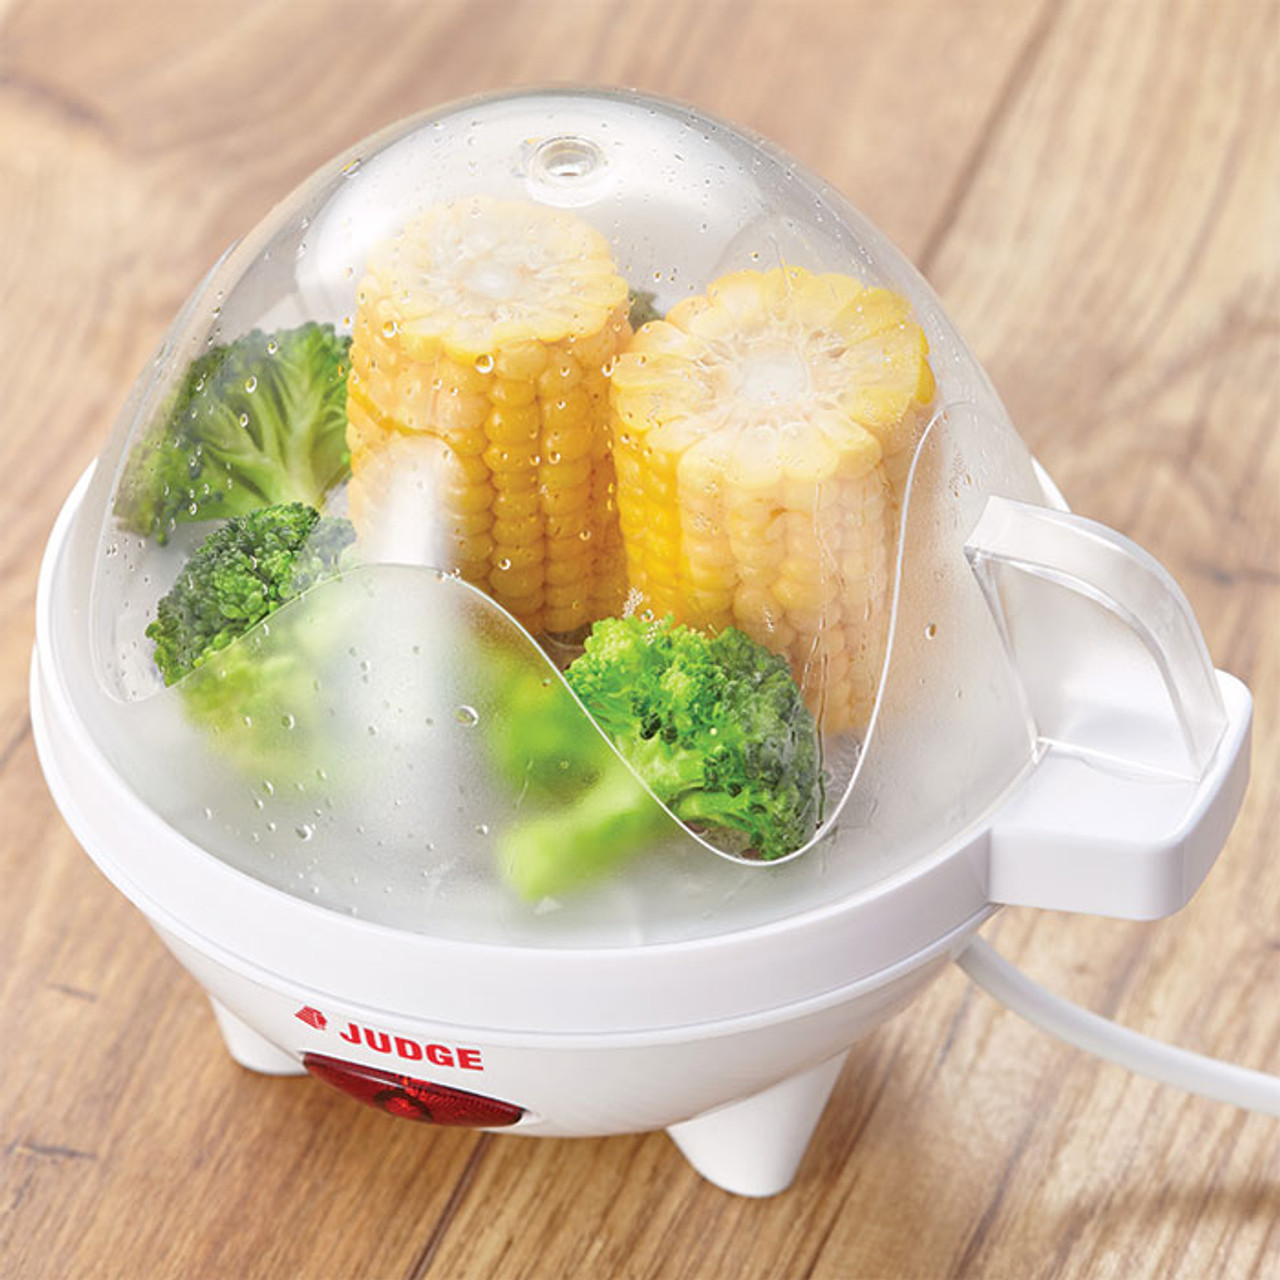 Judge Electrical 7 Hole Egg Cooker